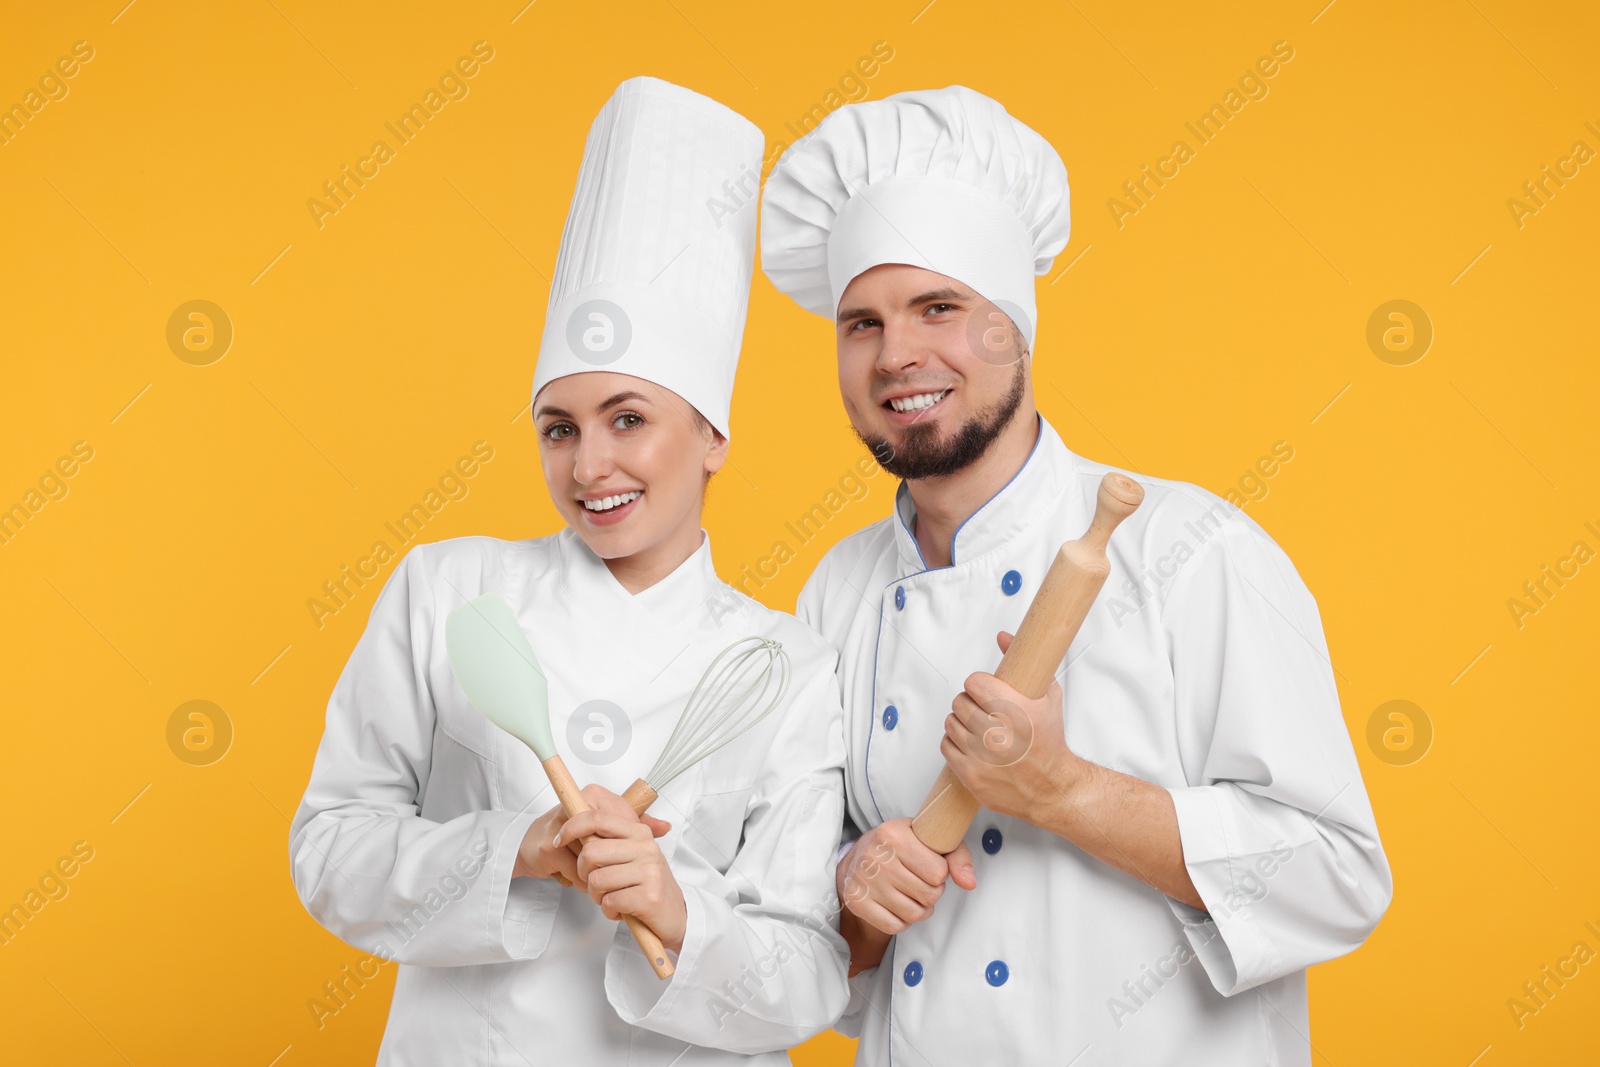 Photo of Happy confectioners in uniforms holding professional tools on yellow background